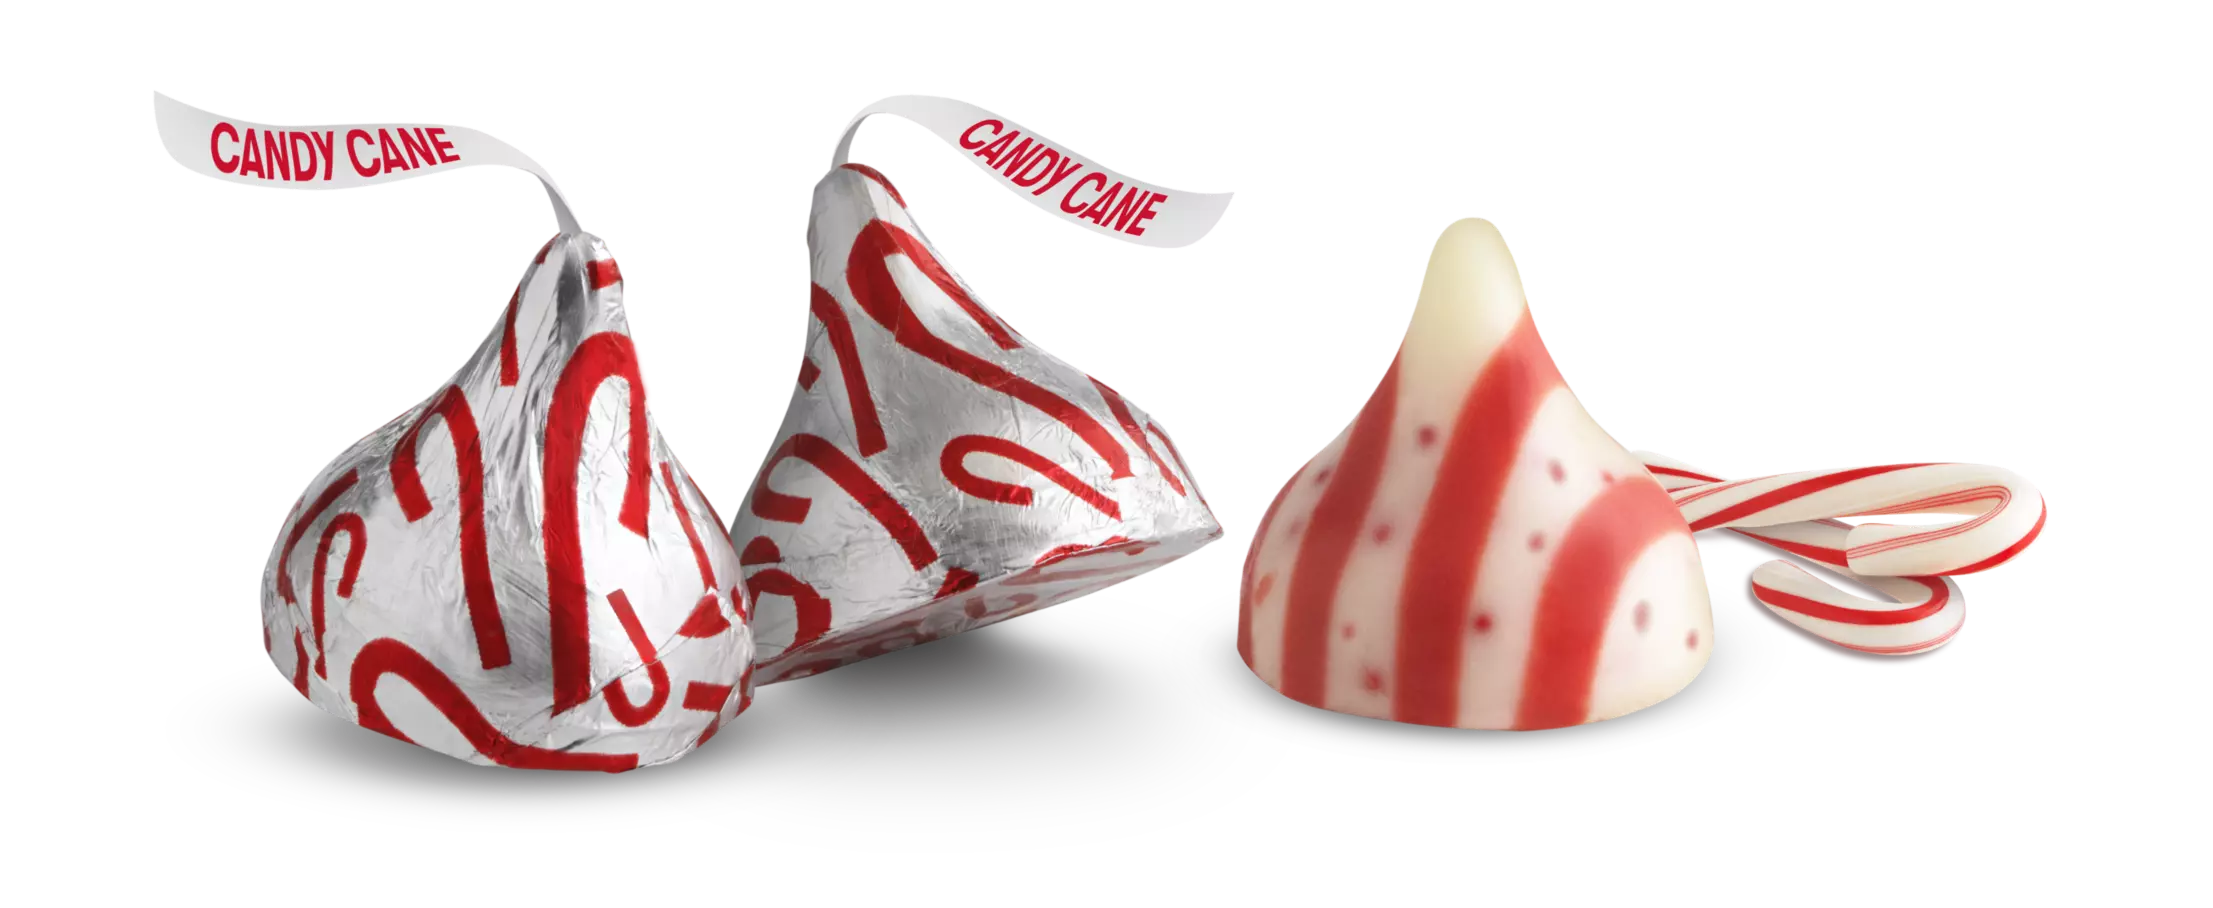 HERSHEY'S KISSES Candy Cane Flavored Mint Candy, 7 oz bag - Out of Package